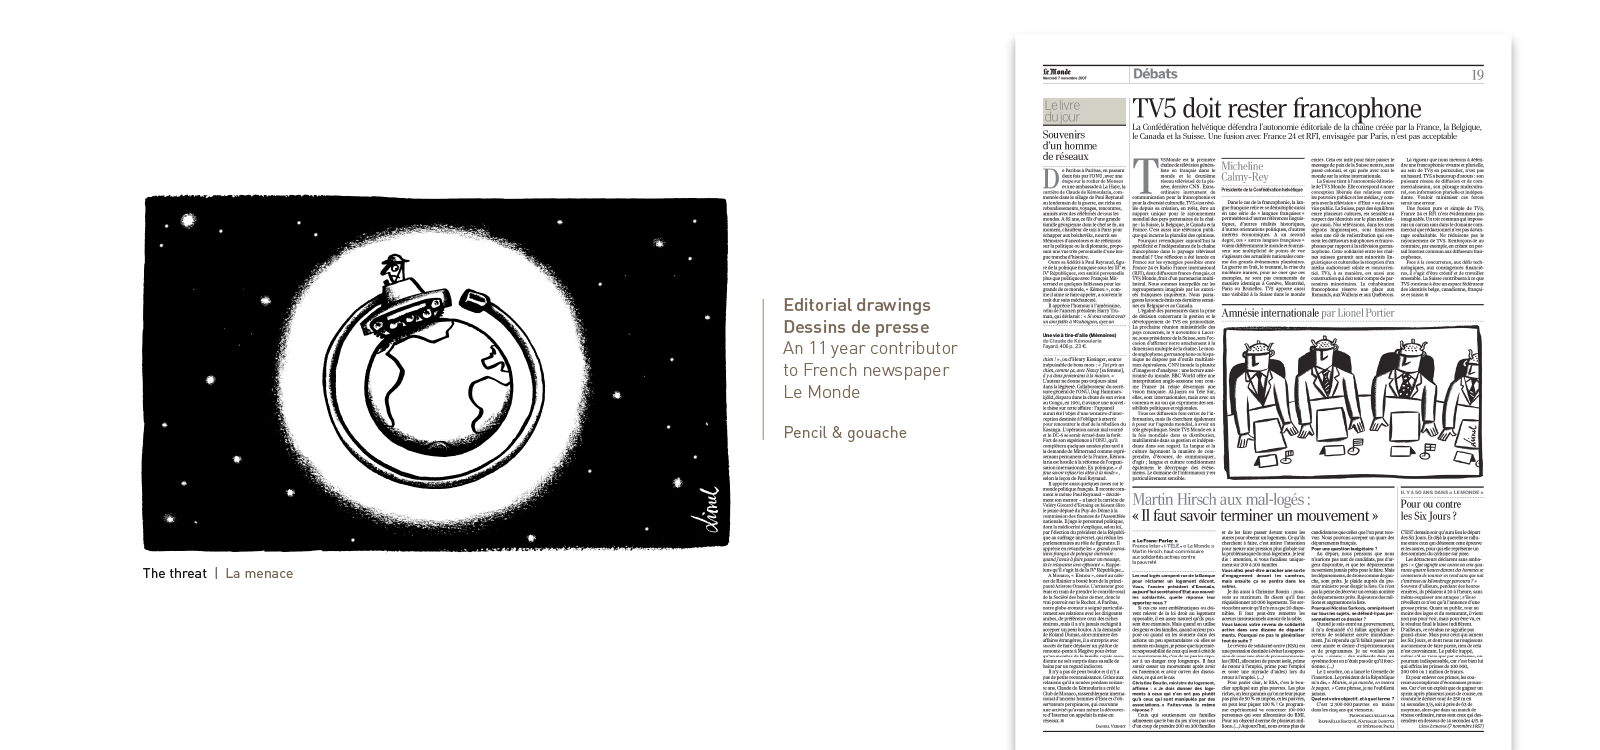 Le Monde editorial drawings by Lionel